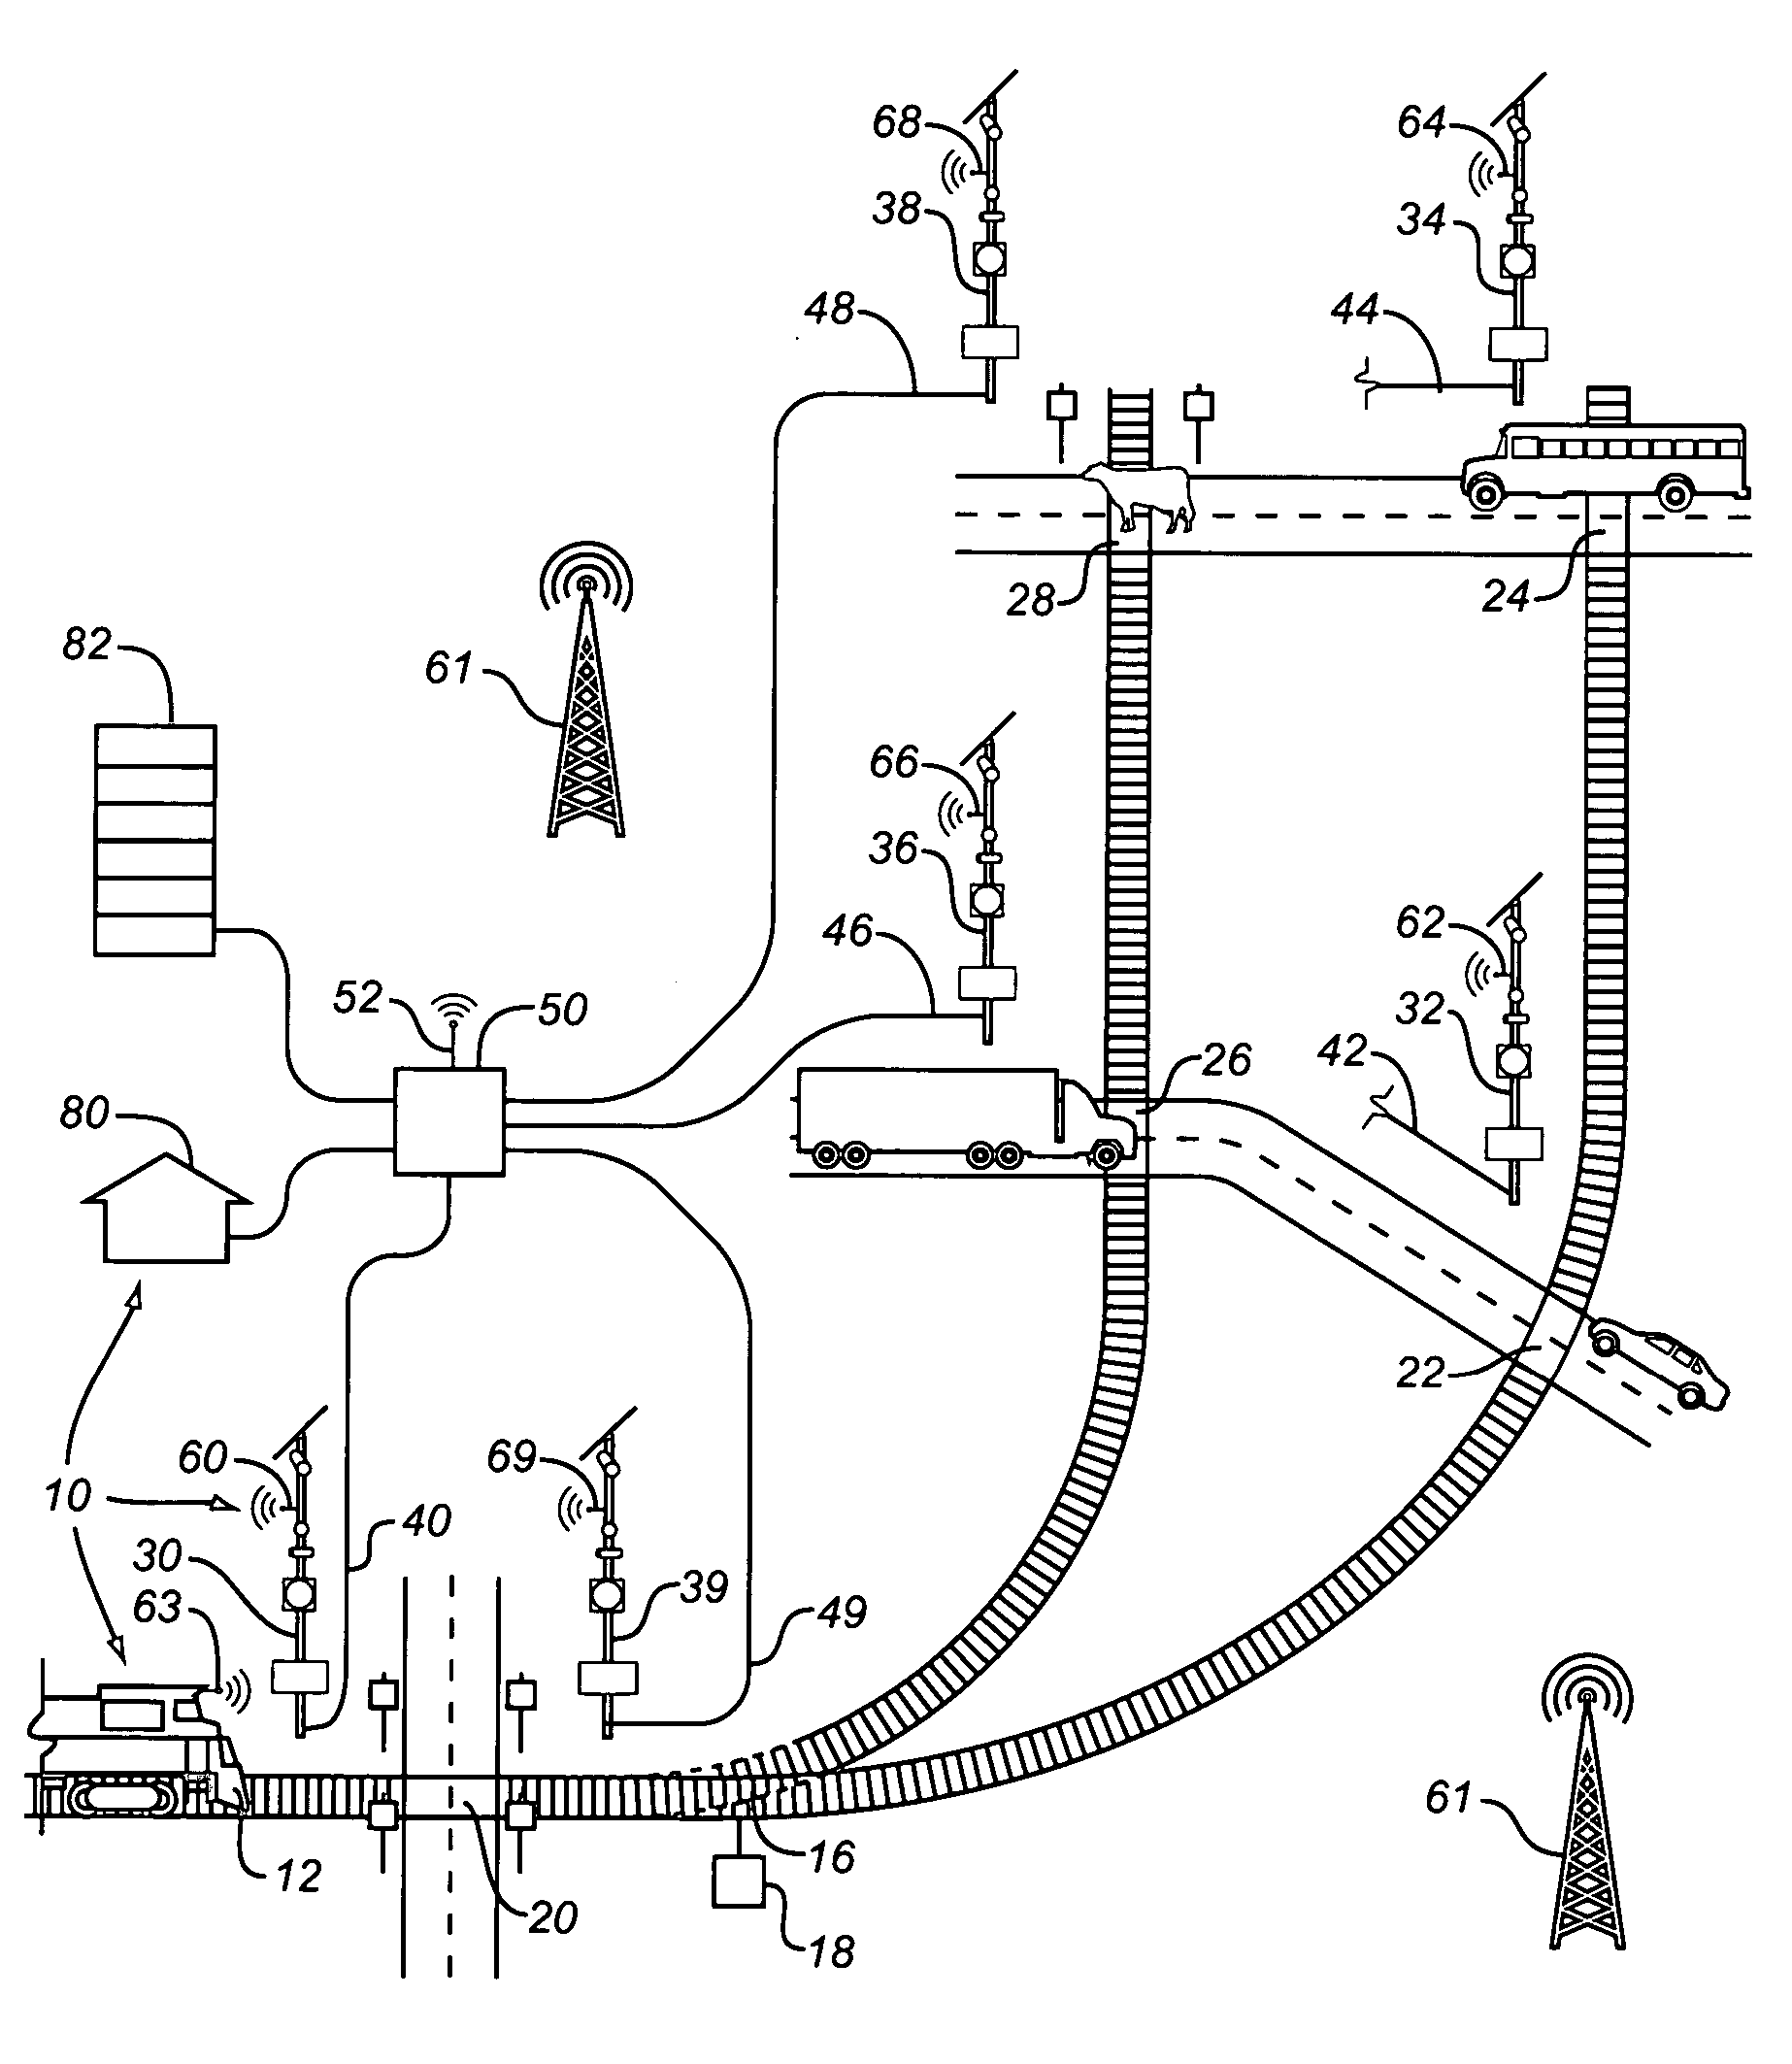 Railroad crossing surveillance and detection system